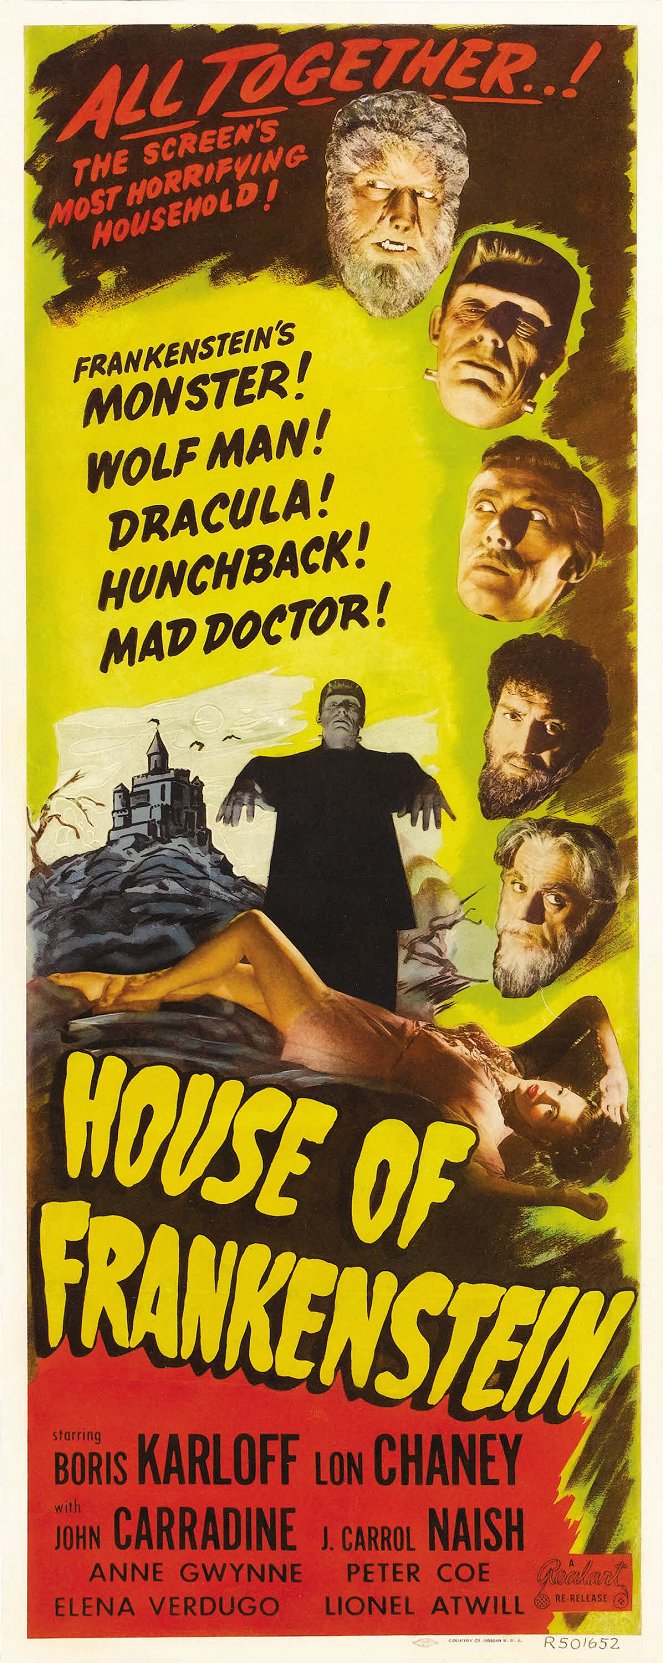 House of Frankenstein - Posters